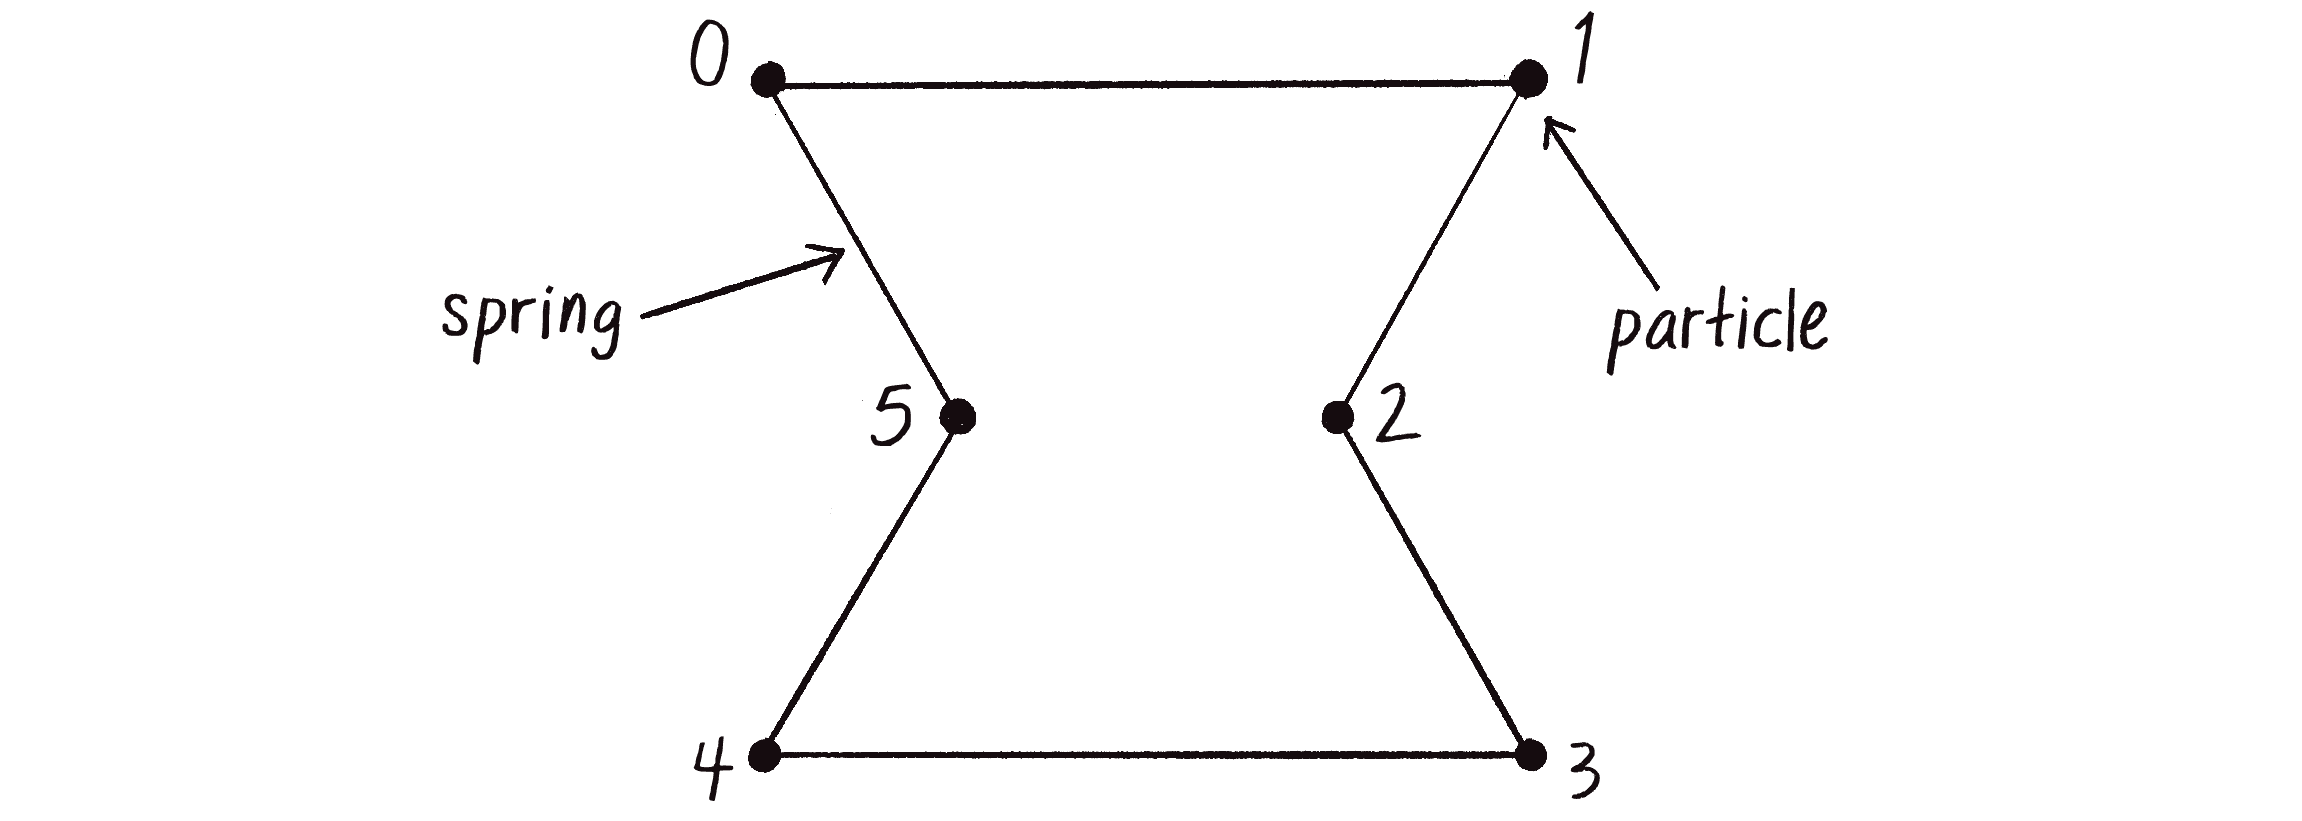 Figure 6.16: A skeleton for a soft body character. The vertices are numbered according to their positions in an array.